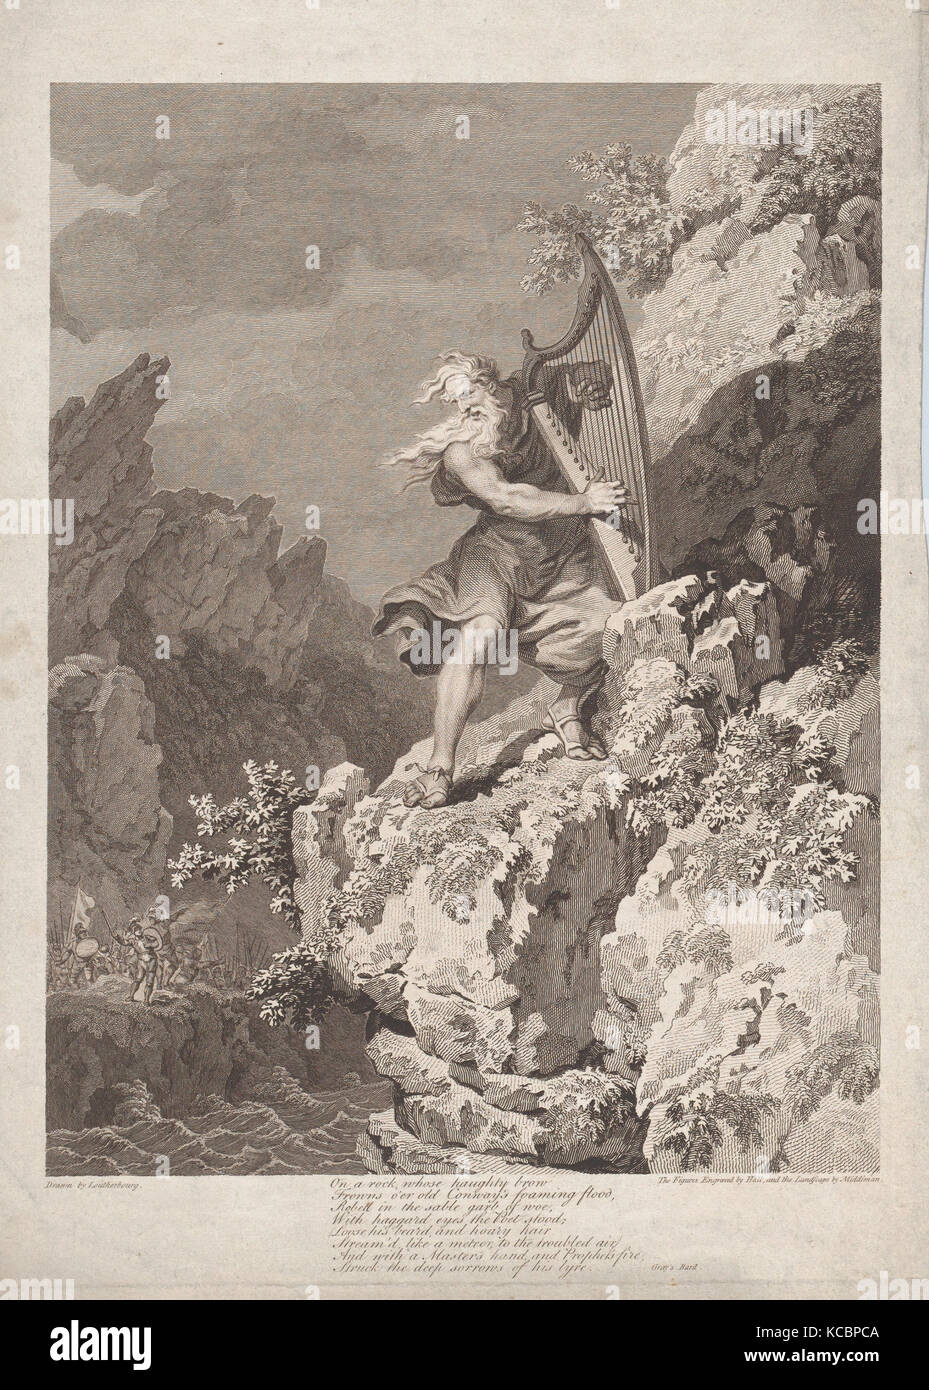 The Bard, After Philippe Jacques de Loutherbourg, 1784 Stock Photo